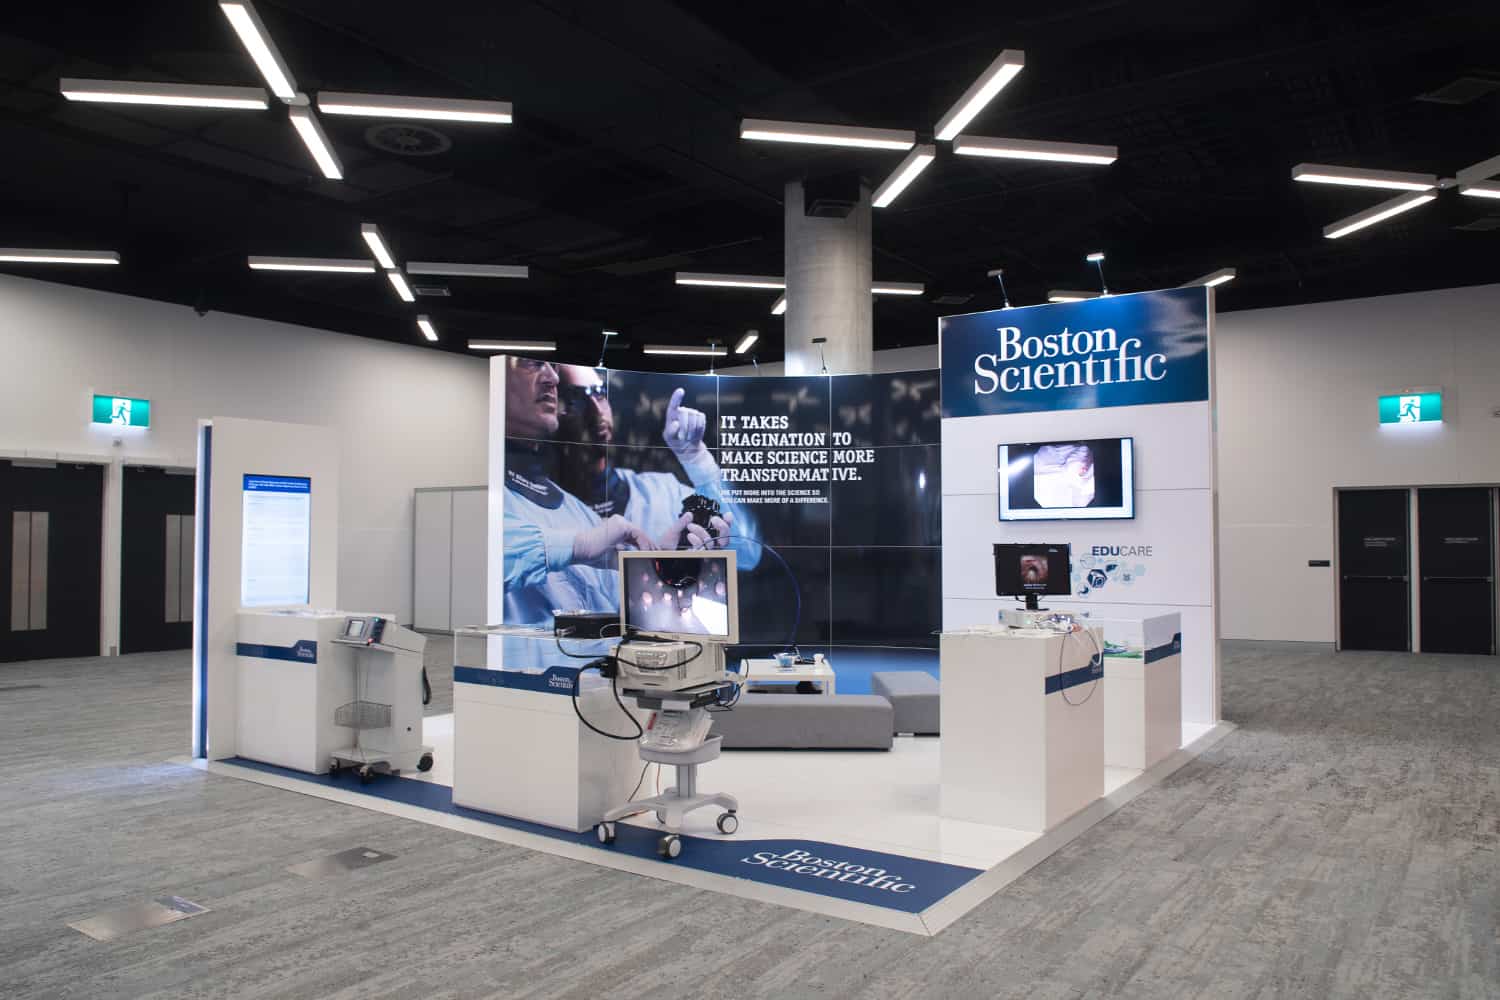 Boston Scientific showtopper exhibition stand at SIES 2019 by Expocentric.com.au